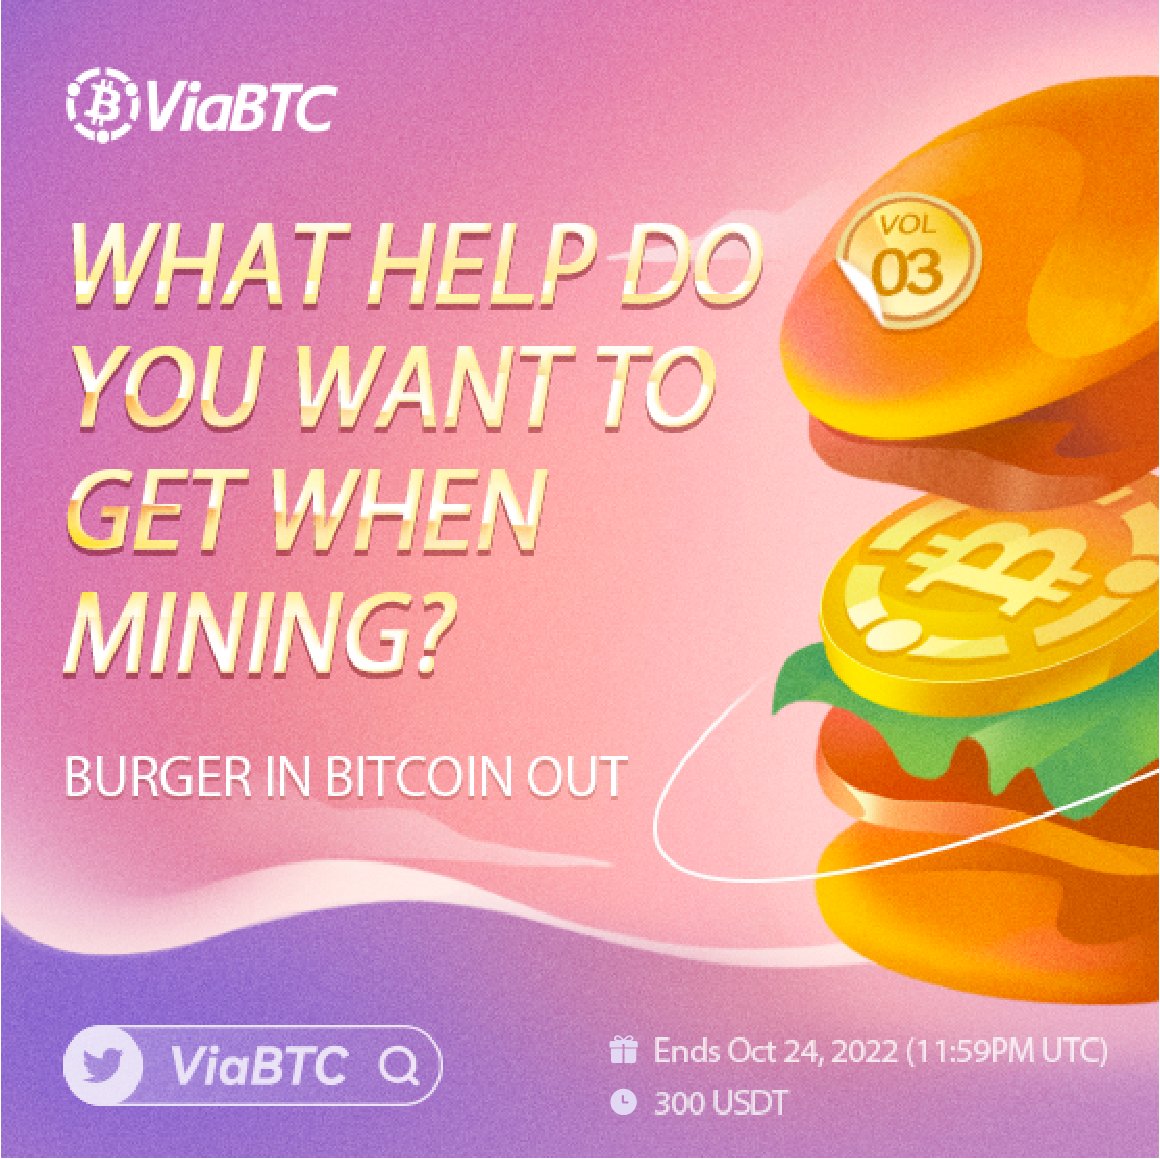 🍔Burger In, #Bitcoin Out Vol.3 Question: What help do you want to get when mining? Share your answer below to win 💰300 and pro tips from #ViaBTC! ￼⏩Follow @ViaBTC ⬇️ Comment your answer ￼📷 Add a picture of your burger! Submission ends 24th Oct. One entry per person.